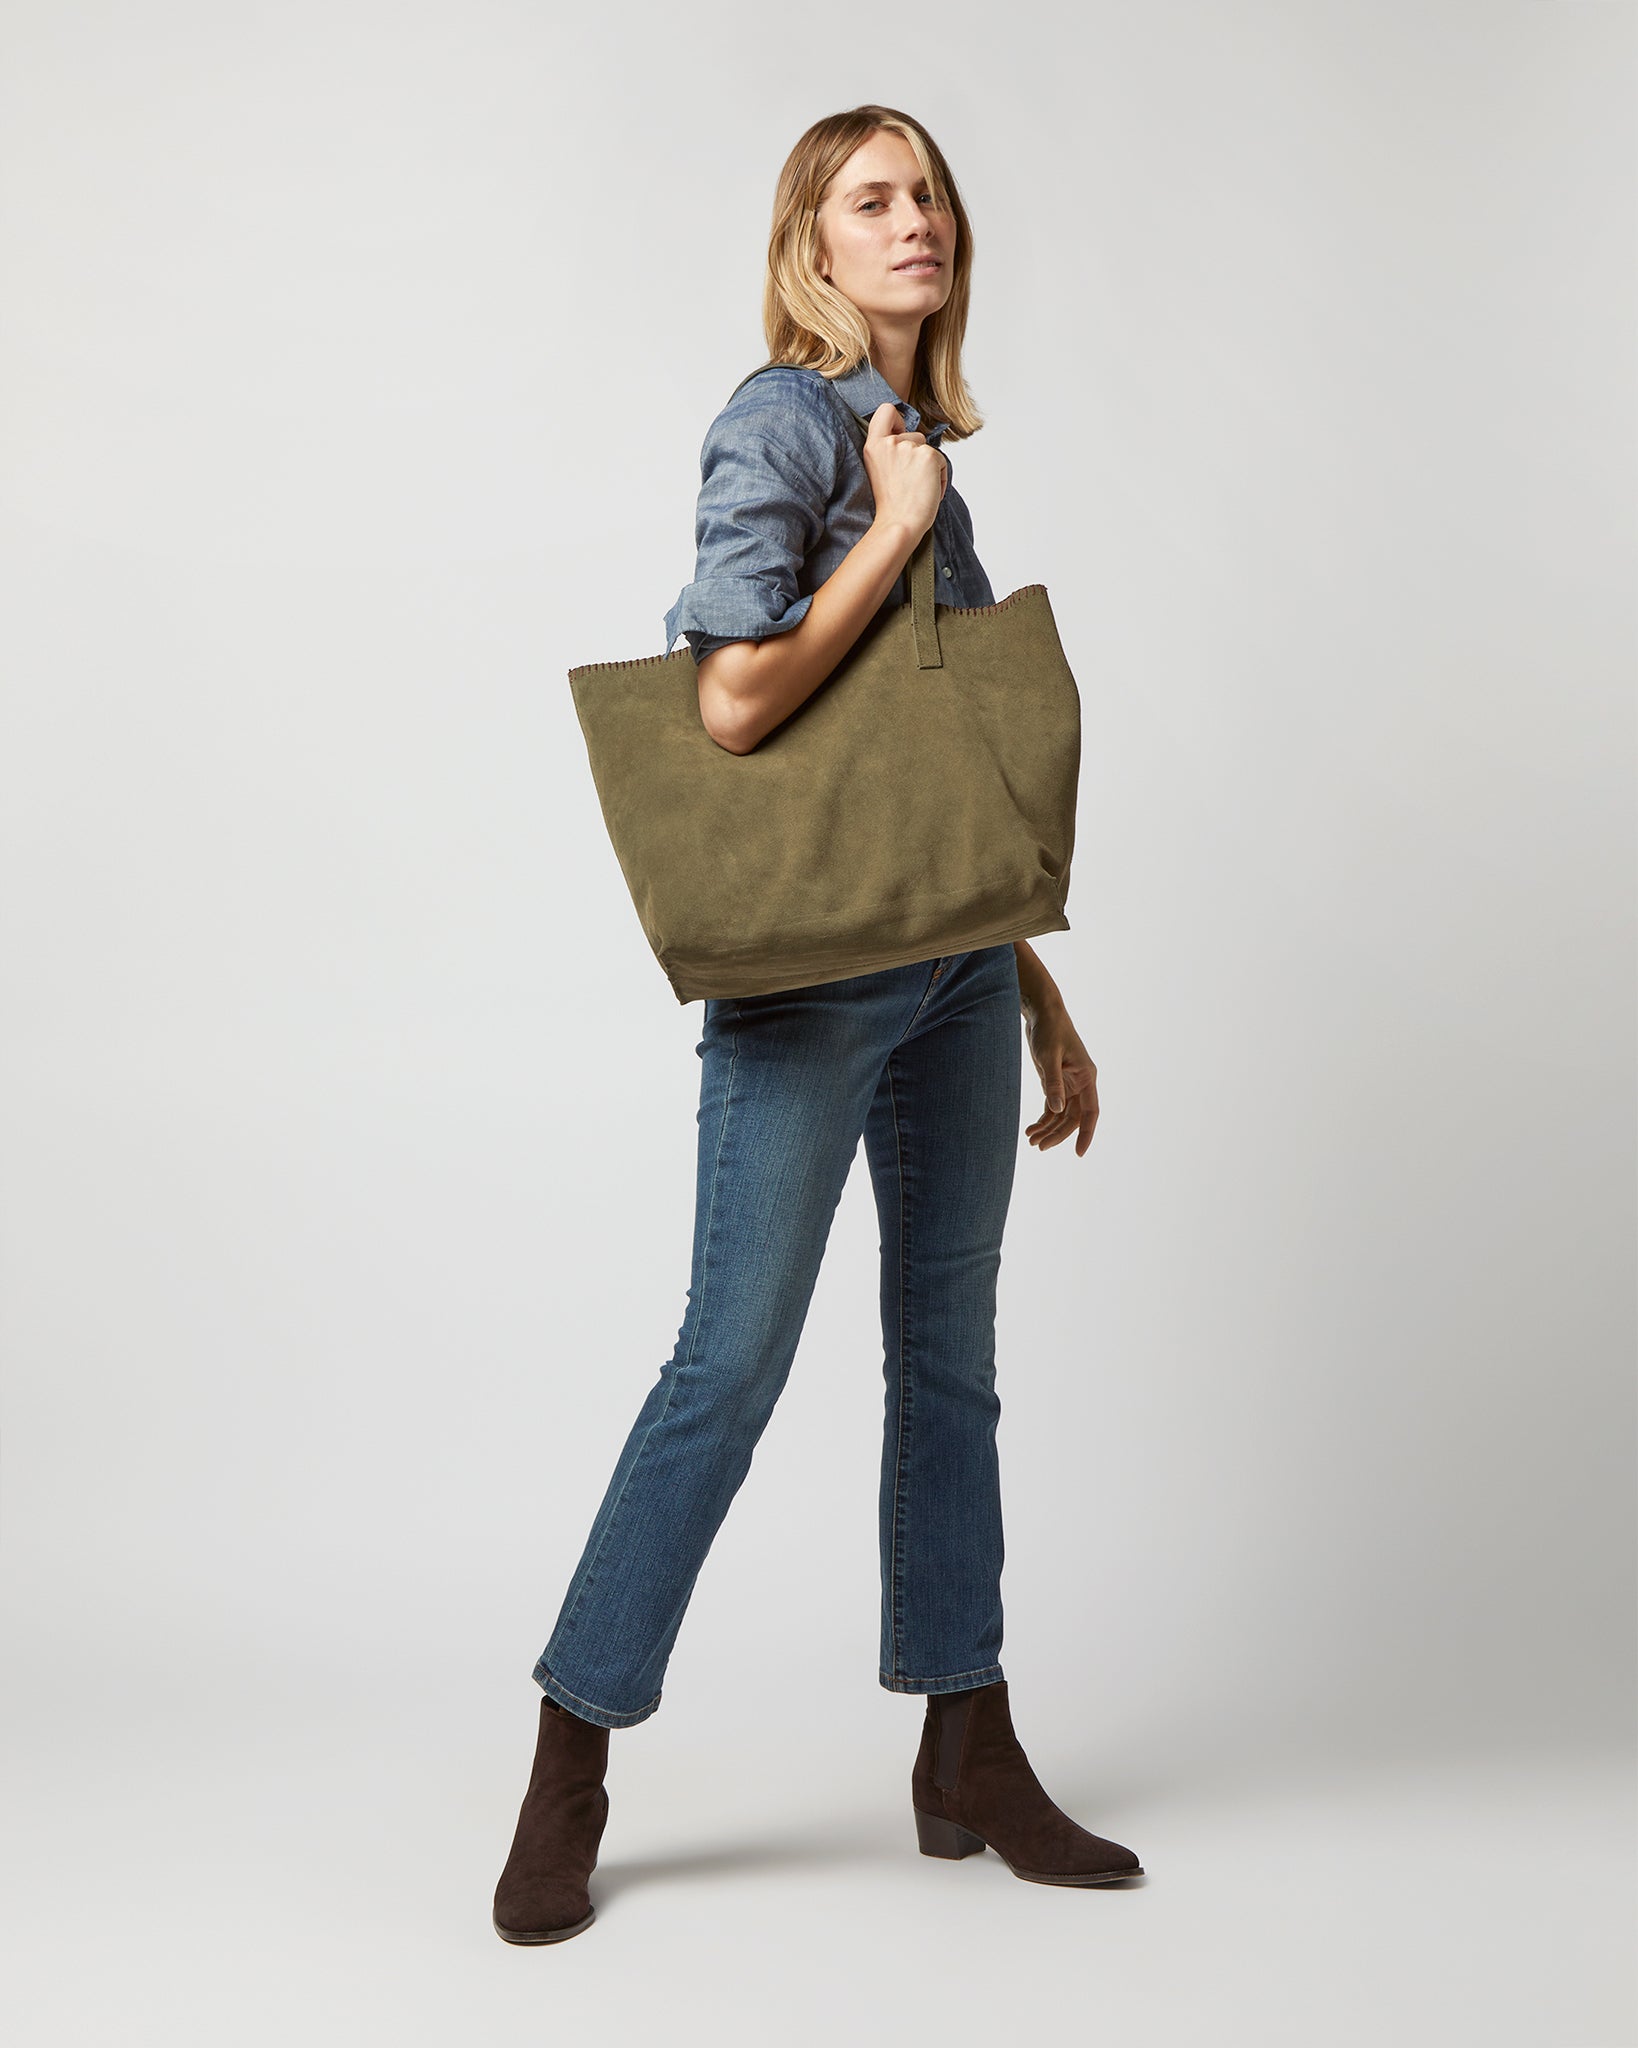 Whipped-Stitch Tote in Olive Suede